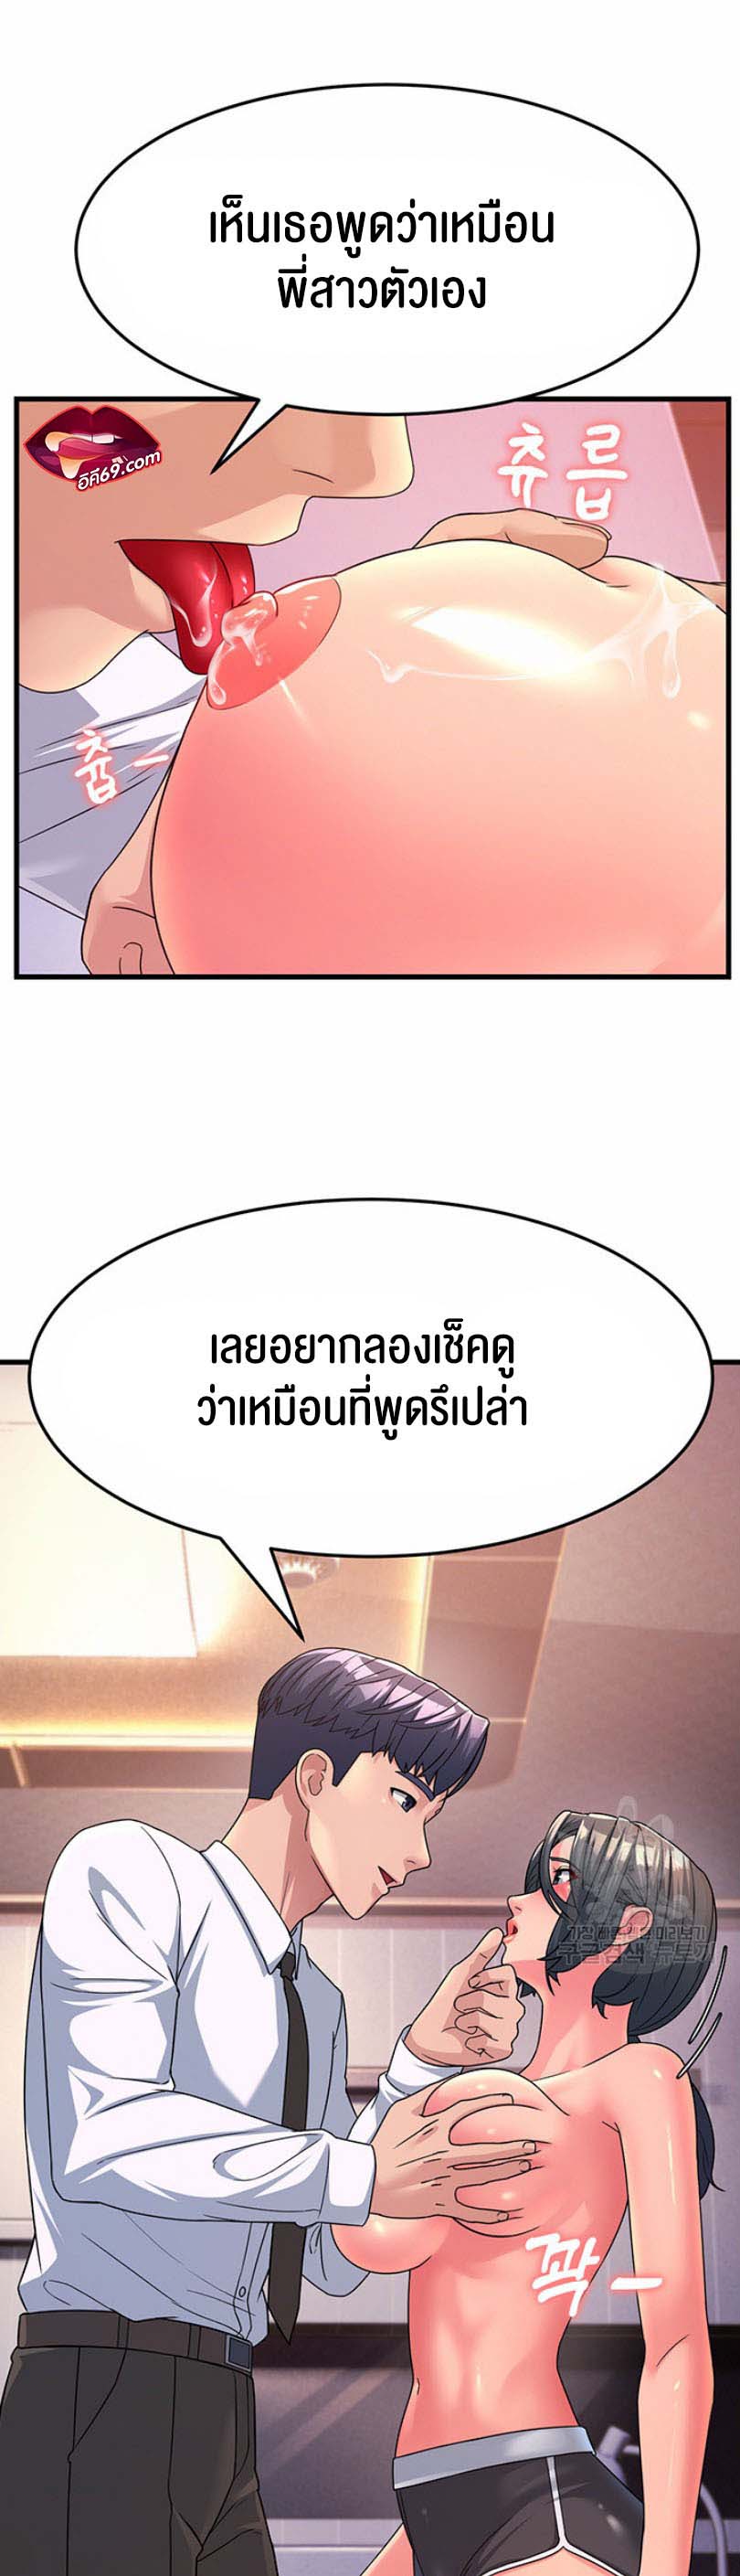 à¸­à¹ˆà¸²à¸™à¹‚à¸”à¸ˆà¸´à¸™ à¹€à¸£à¸·à¹ˆà¸­à¸‡ Mother in Law Bends To My Will 9 50